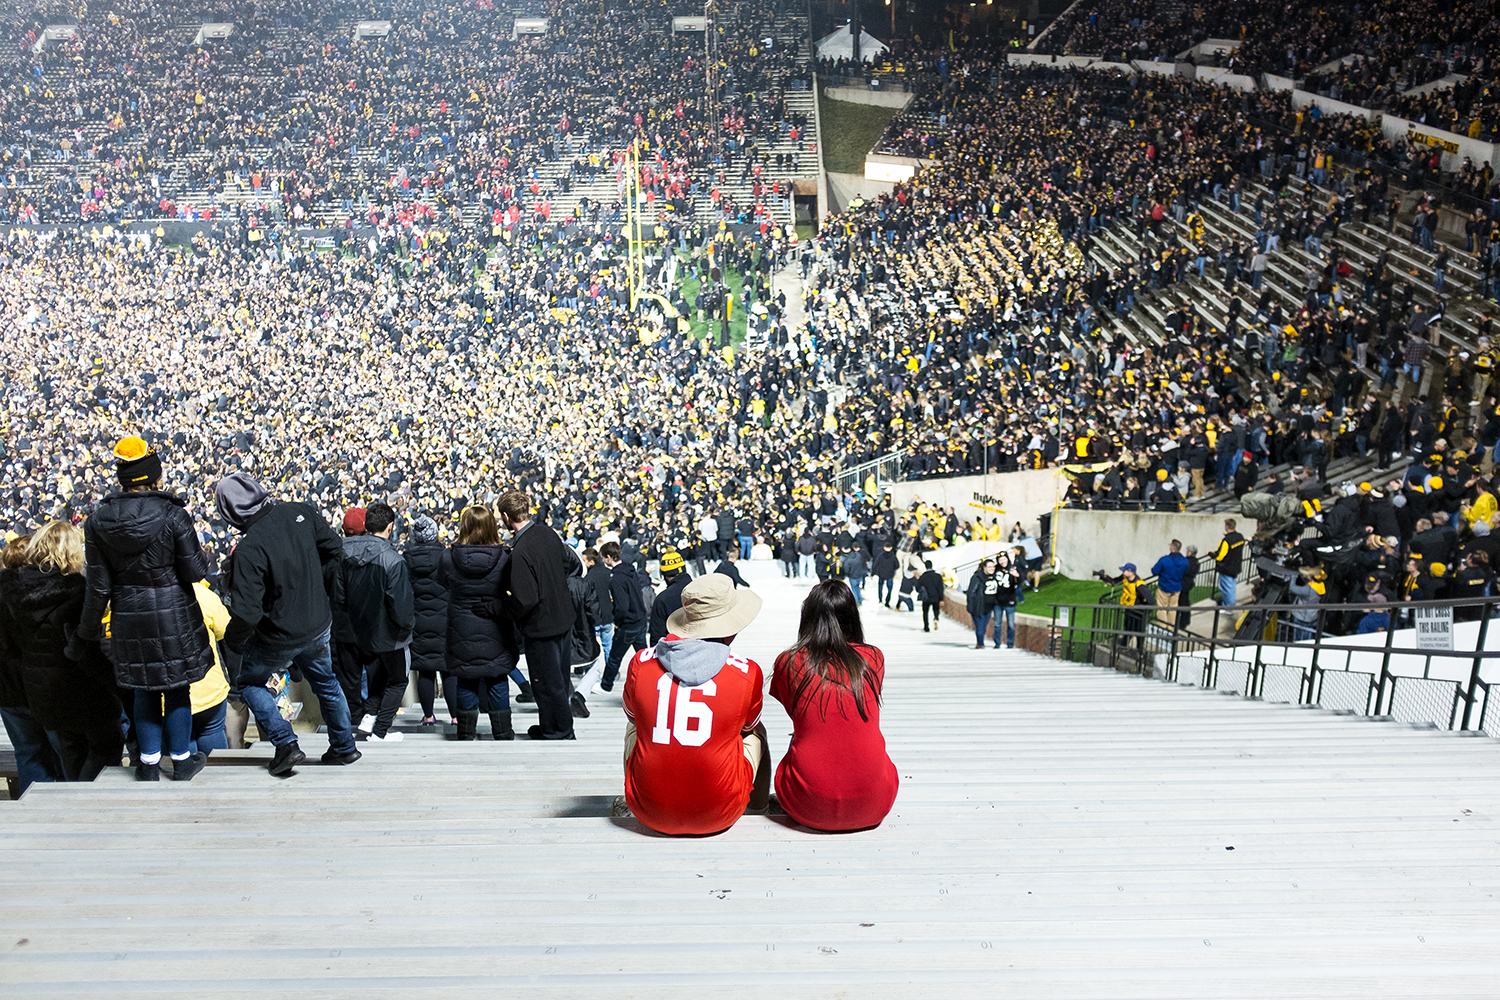  Ohio State fans sit in the stands at Kinnick Stadium as Iowa fans rush the field after the Hawkeyes crushed the Buckeyes 55-24 on Saturday, Nov. 4, 2017.  